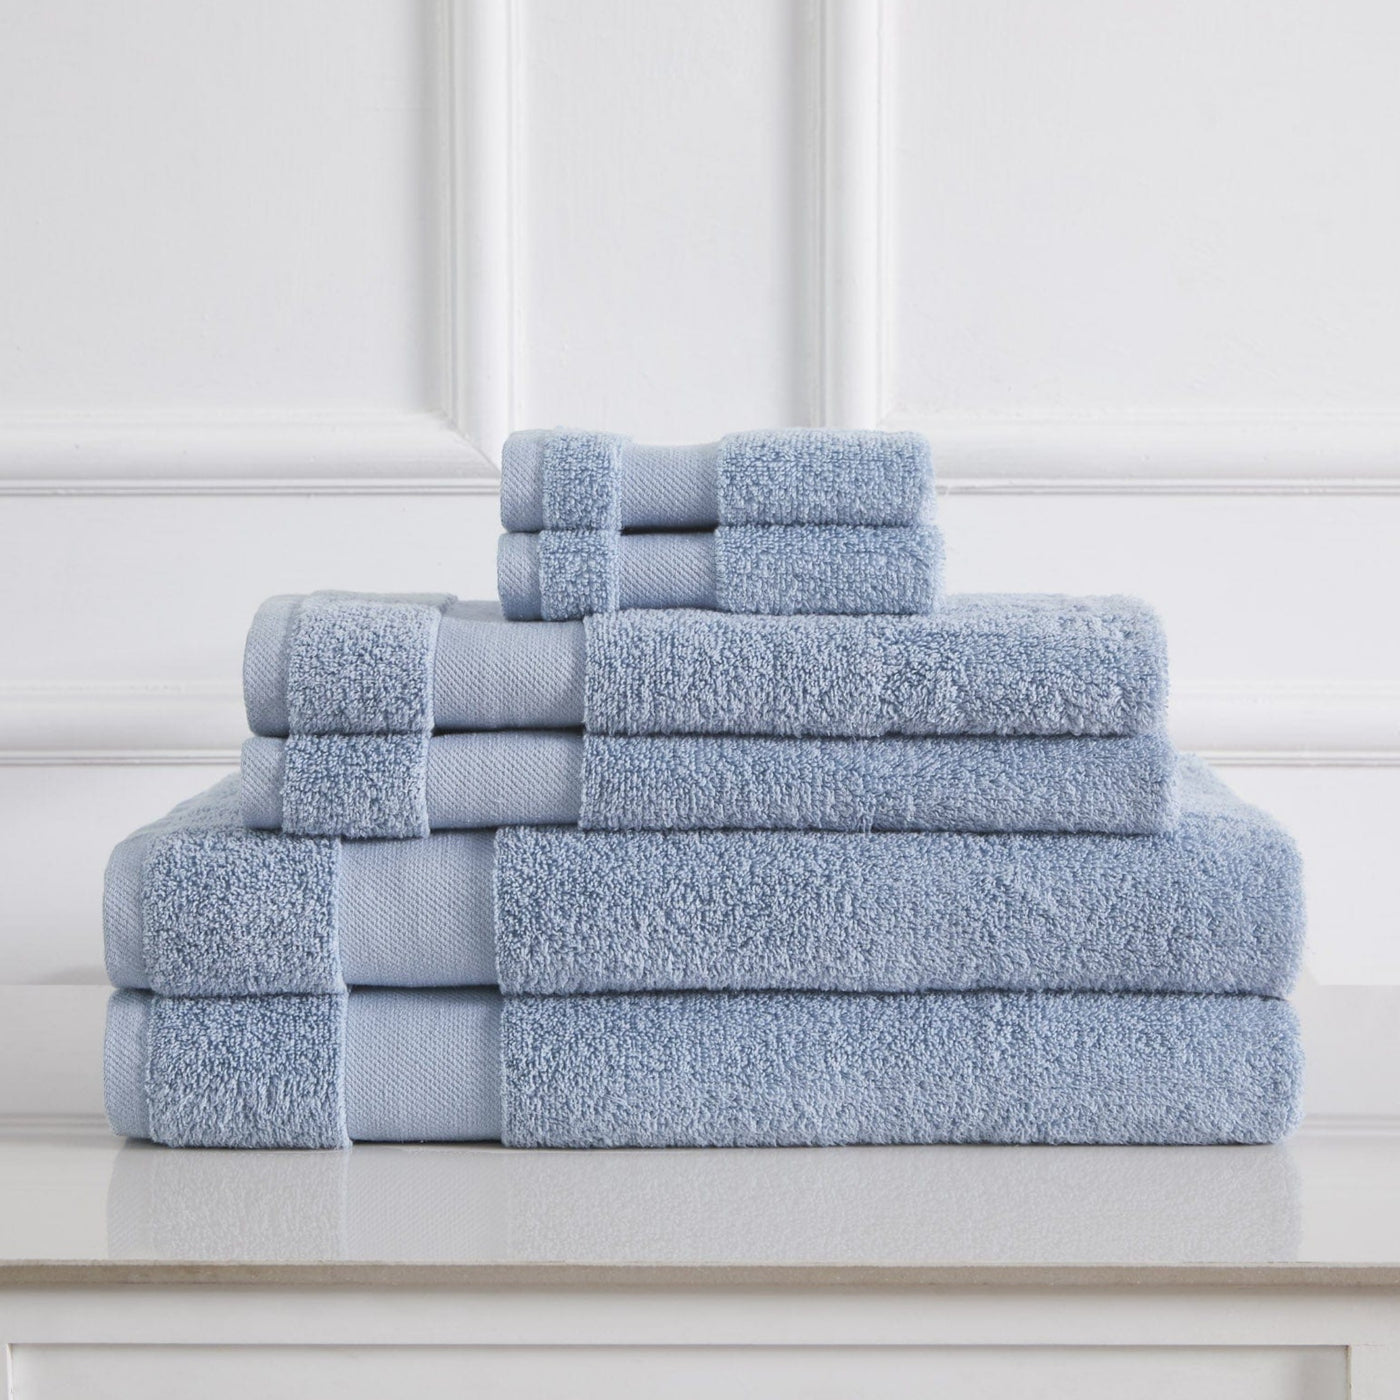 6 Piece of Super-Plush Bath Towel, Hand Towels and Wash Cloth in Blue#color_medium-weight-classic-towel-blue